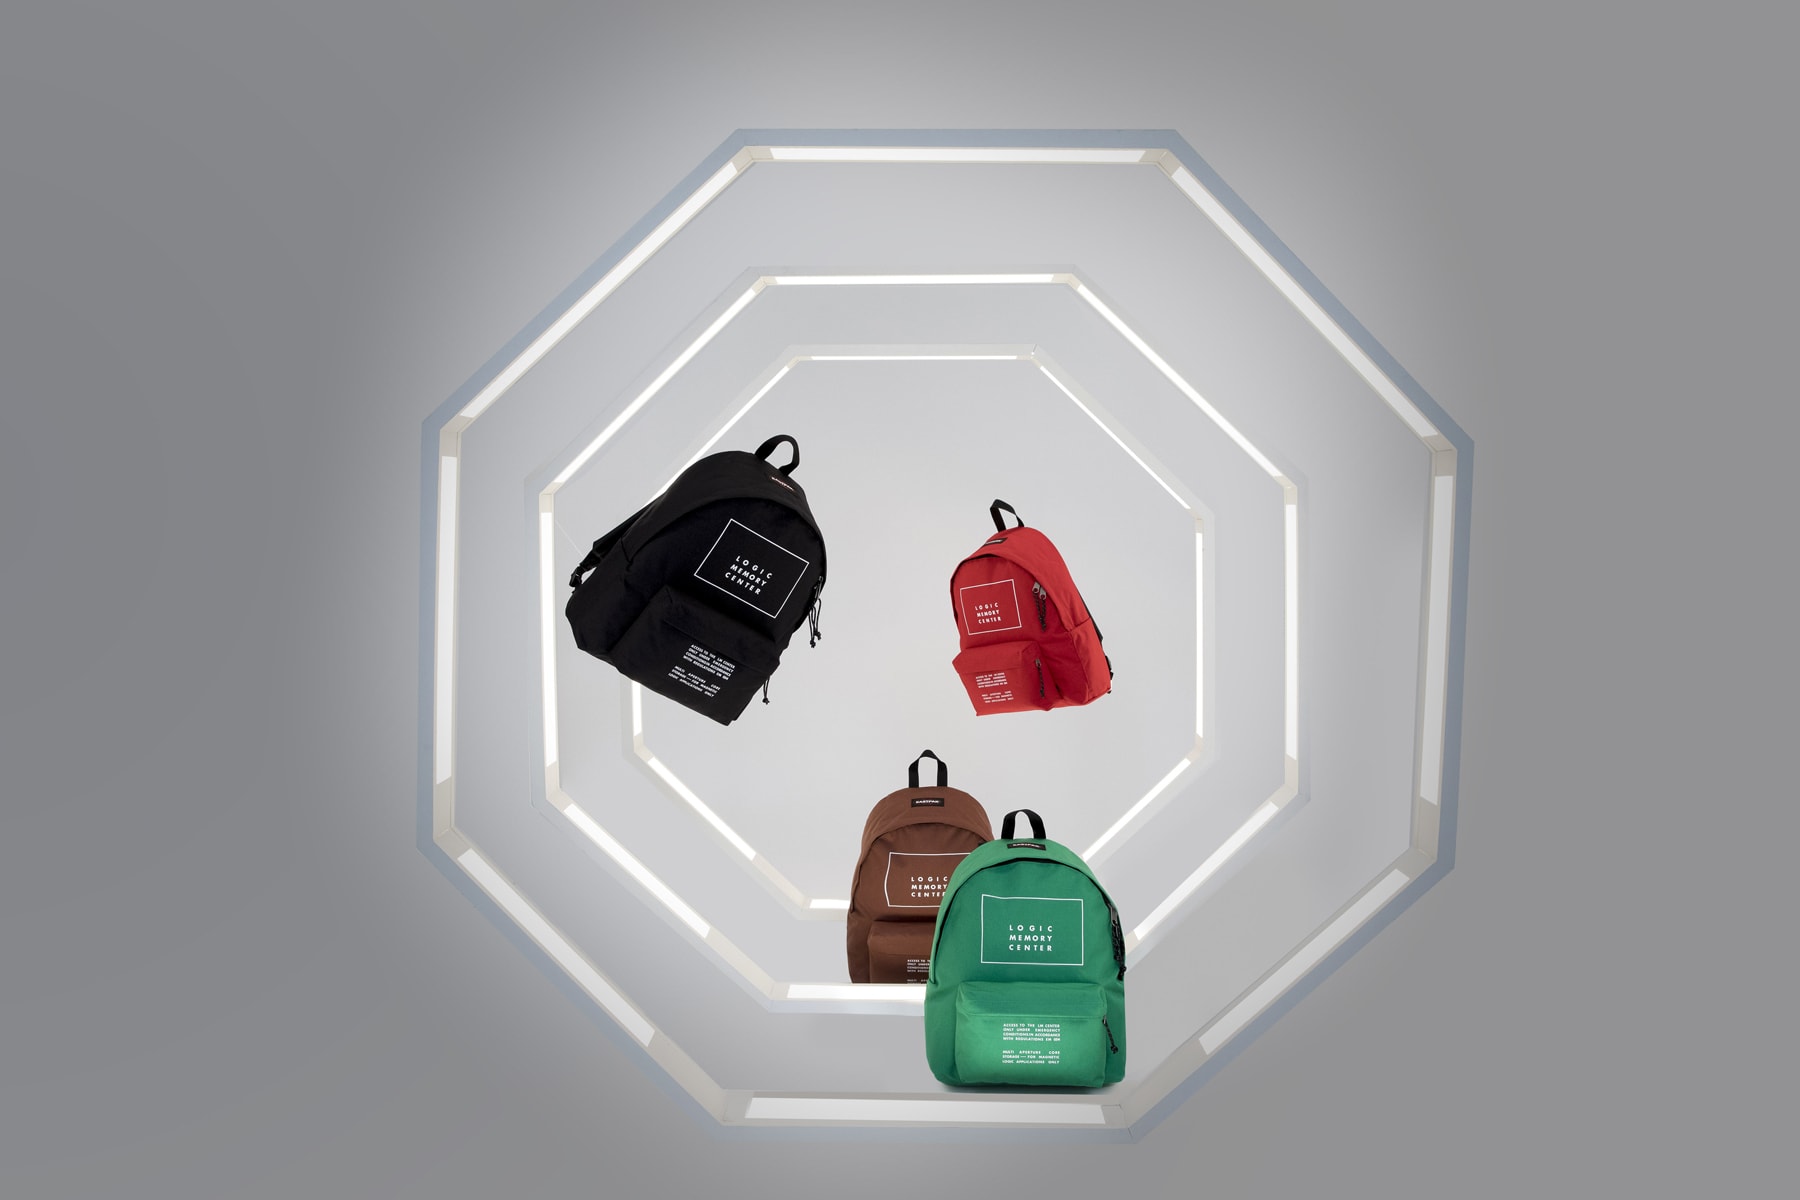 undercover eastpak fall winter 2018 bag backpack collaboration stanley kubrick 2001 space odyssey inspiration buy purchase pre order drop release date info buy black green red